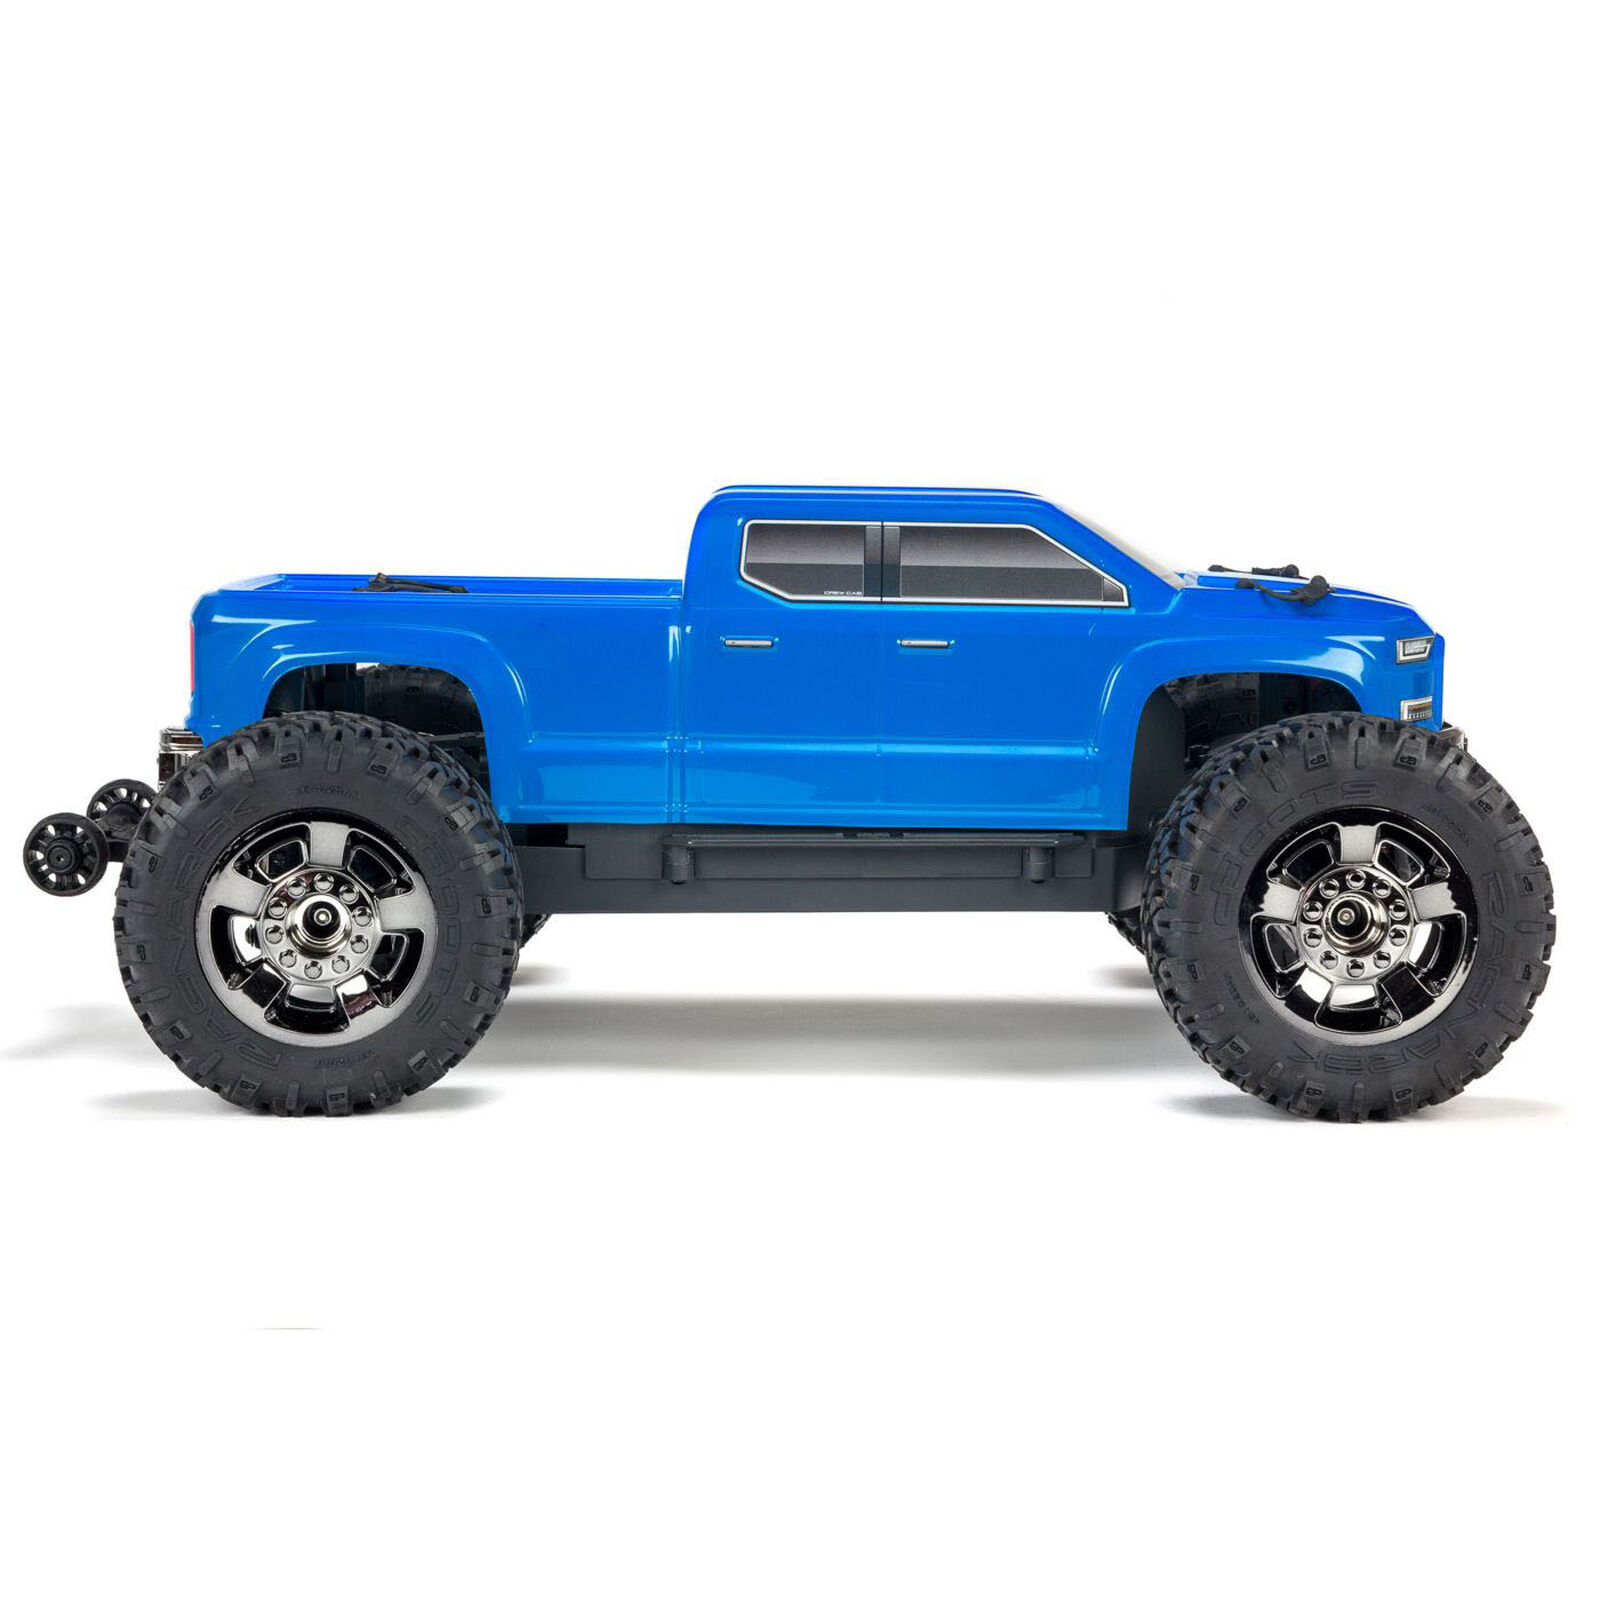 ARRMA 1/10 Big Rock 4X4 V3 3S BLX Brushless Monster RC Truck RTR  (Transmitter and Receiver Included, Batteries and Charger Required), Black,  ARA4312V3